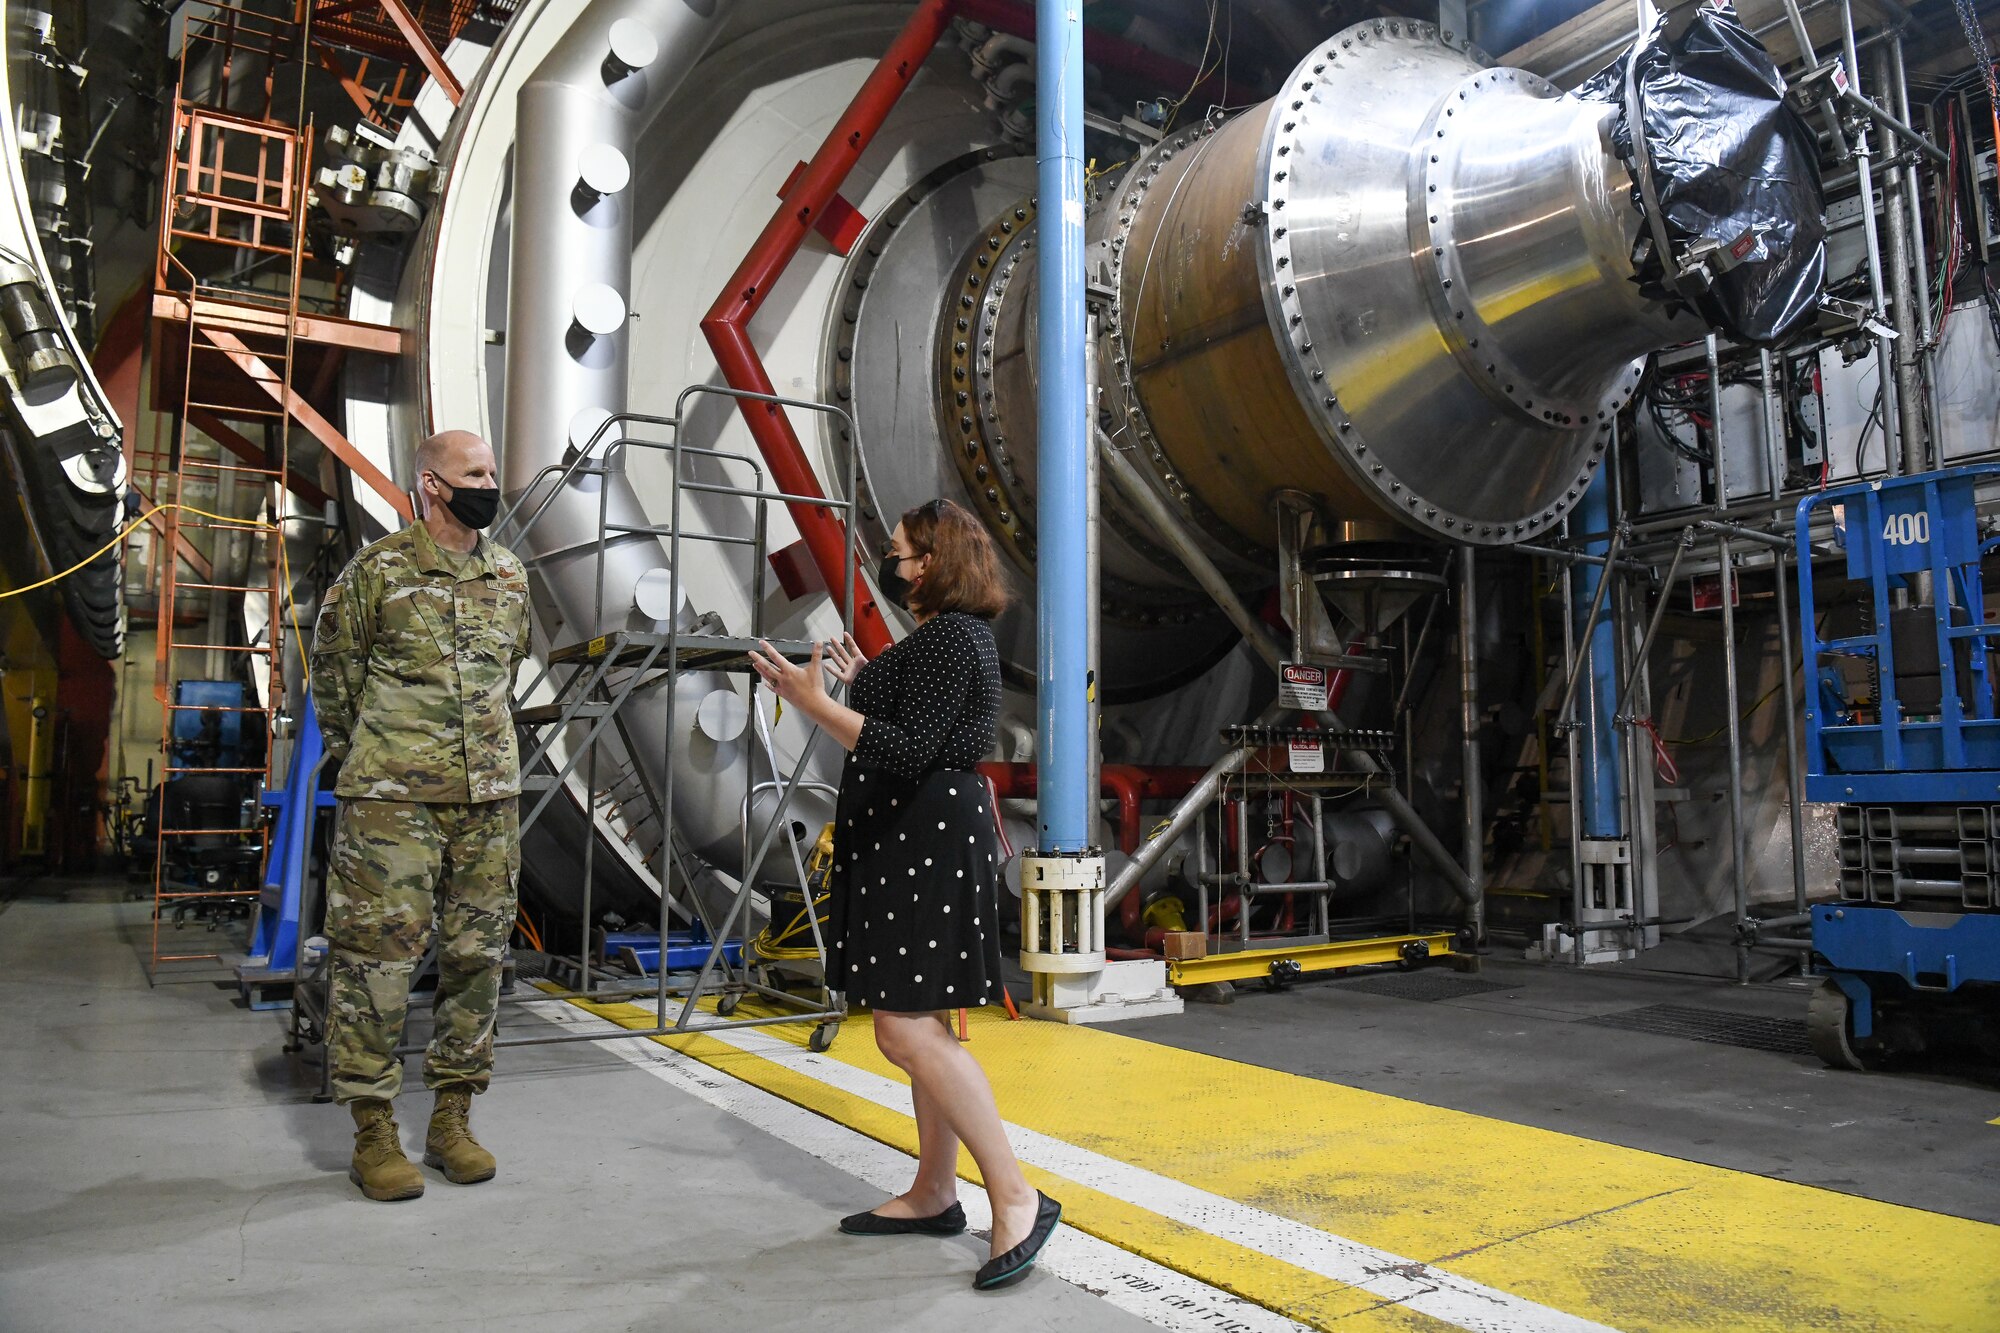 Rachel Garrard, a test manager with the Propulsion Test Branch of Arnold Engineering Development Complex (AEDC), explains how the C-1 altitude engine test cell works to Maj. Gen. Evan Dertien, commander, Air Force Test Center, during Dertien's visit to Arnold Air Force Base, headquarters of AEDC, Oct. 13, 2021. In C-1, large military and commercial engines are tested at simulated altitude conditions. In recent years, C-1 has primarily been used to test F119 engines for the F-22 Raptor and the F135 engines for the F-35 Lightning II. (U.S. Air Force photo by Jill Pickett)